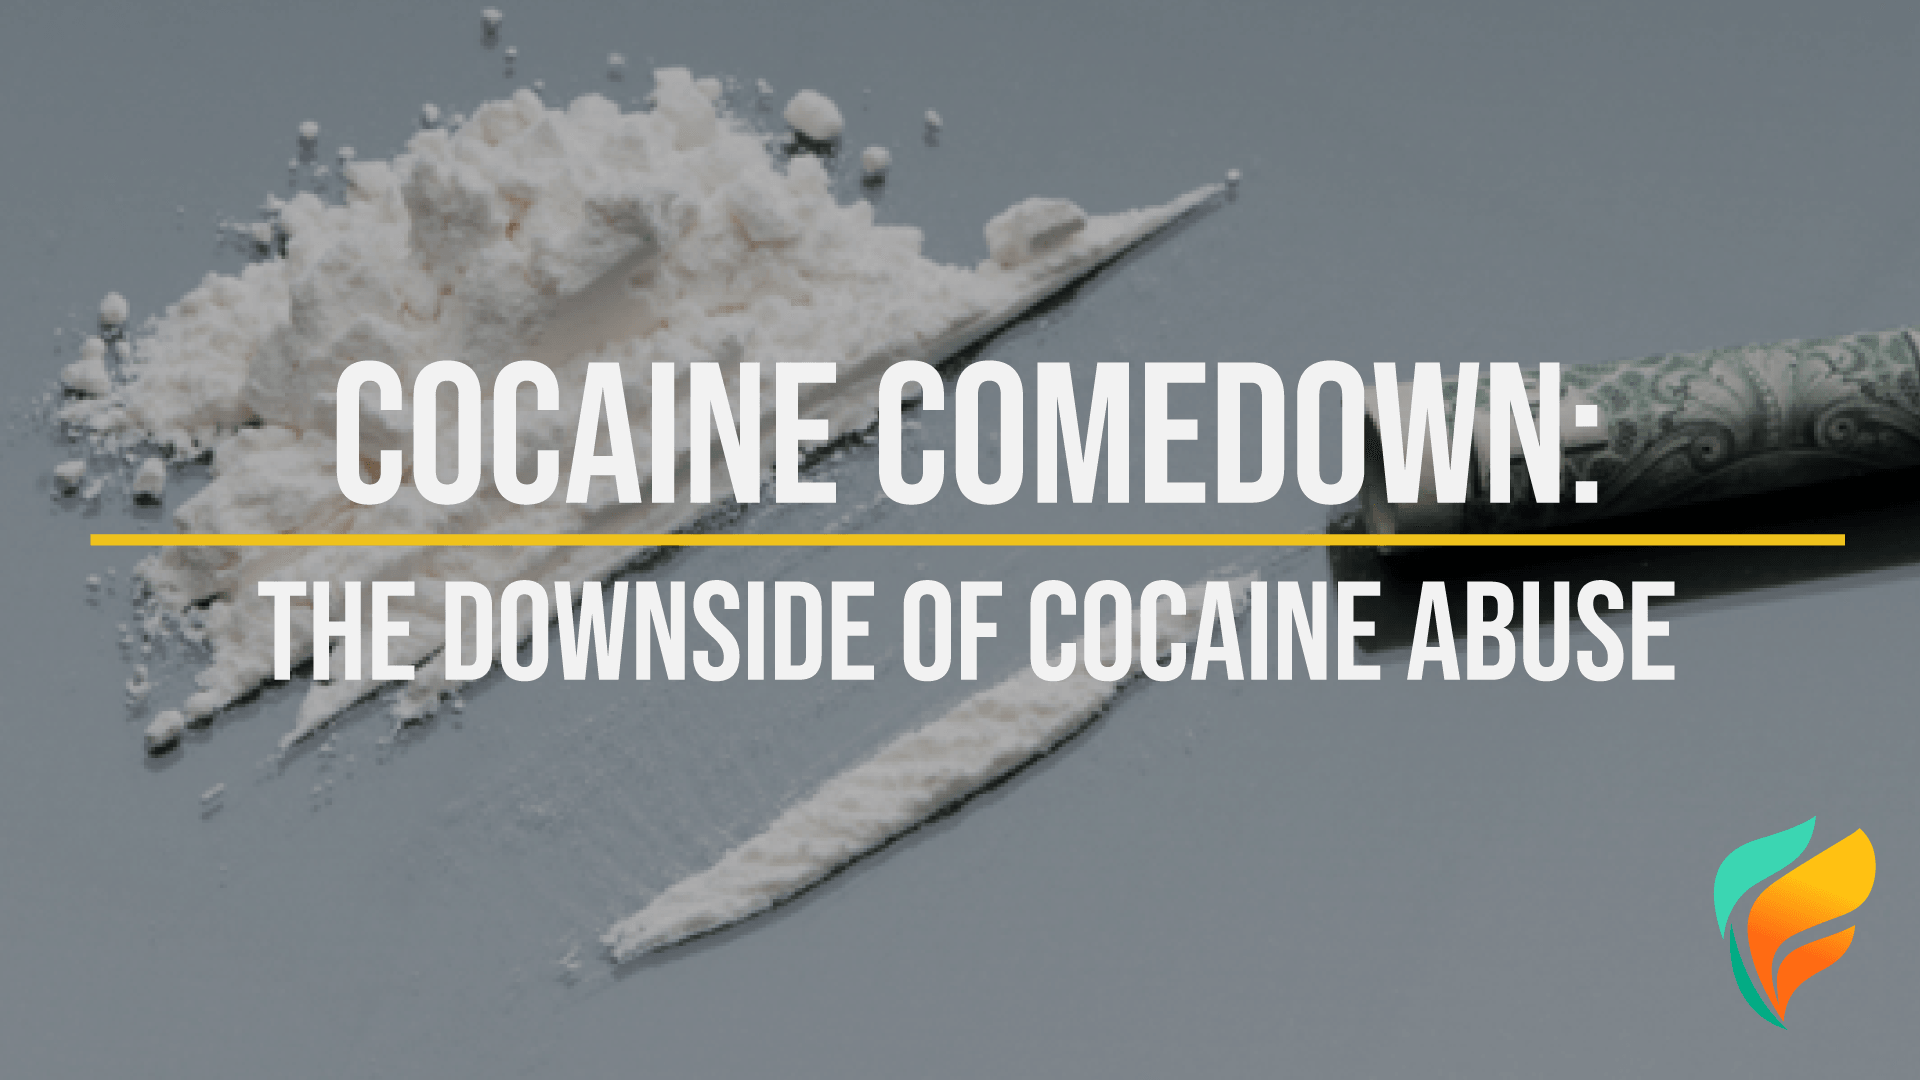 What is a Cocaine Comedown?